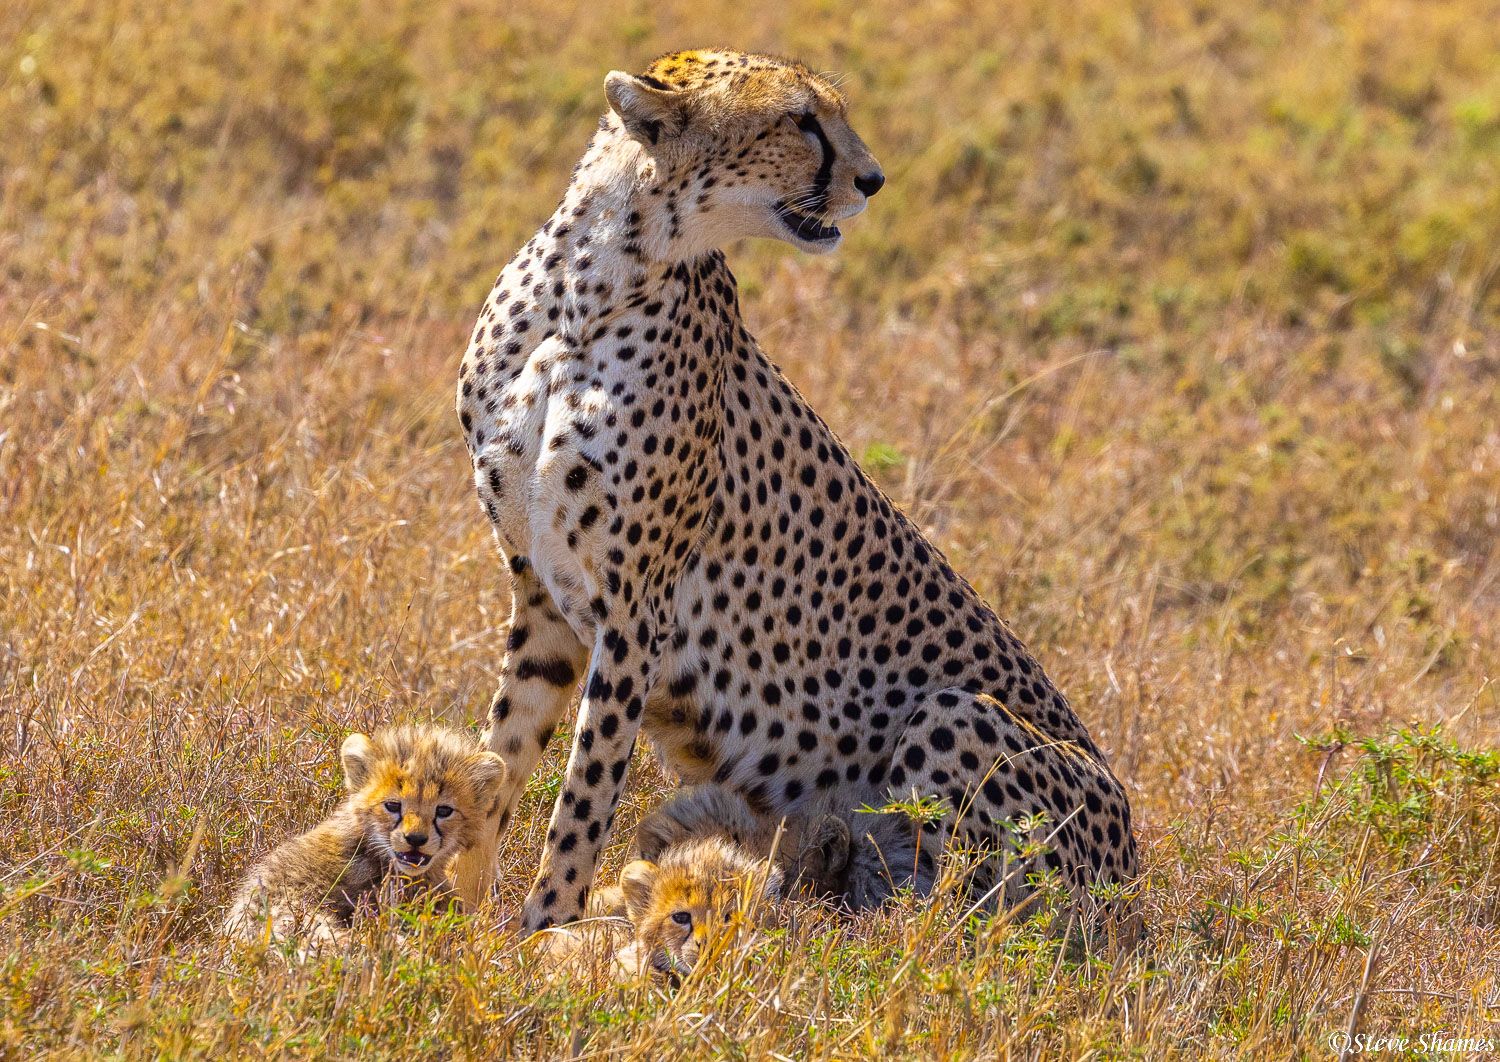 Mother cheetah looking around for danger. Lots of danger out there for young cheetah cubs.